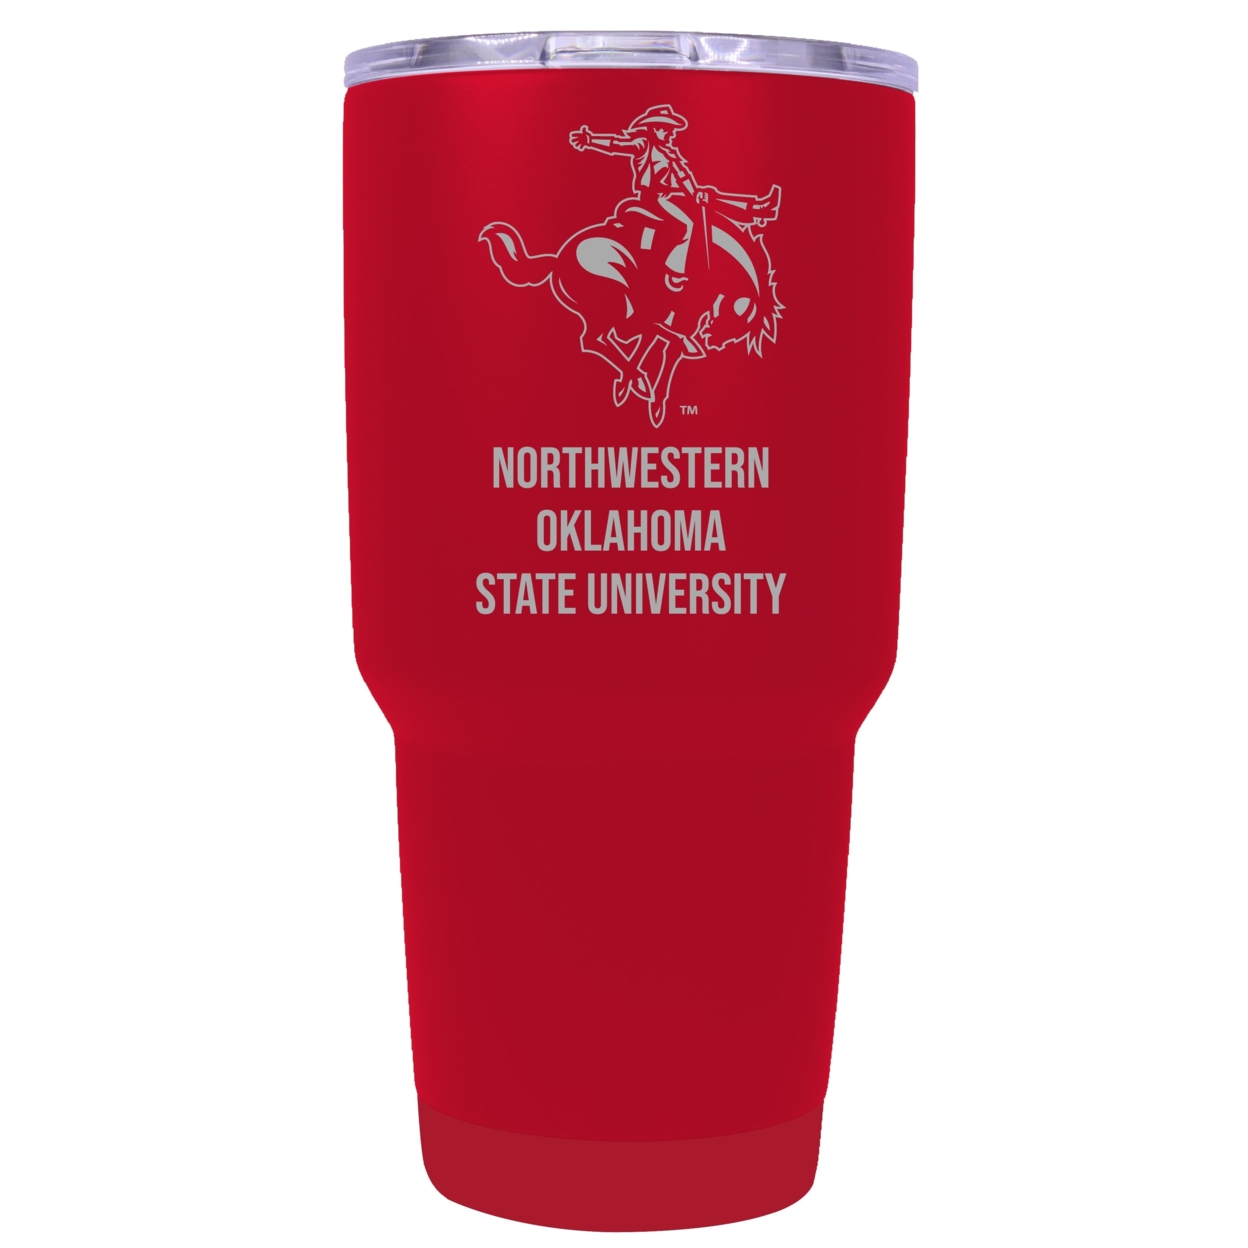 Northwestern Oklahoma State University 24 Oz Laser Engraved Stainless Steel Insulated Tumbler - Choose Your Color. - Red